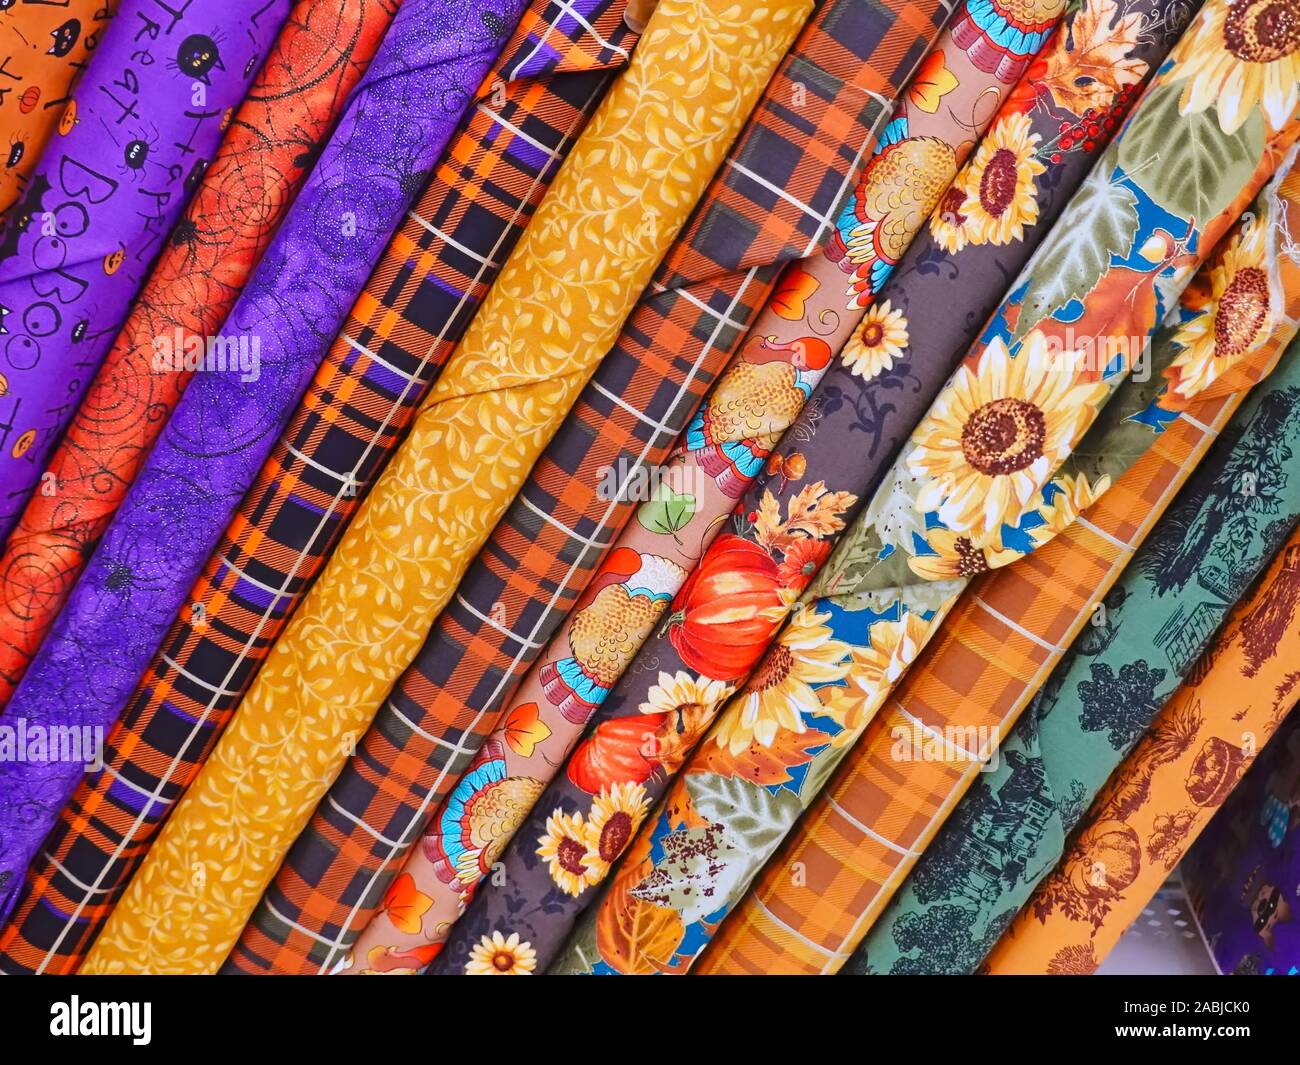 Display of Colourful Bolts of Fabric in a Fabric Store. Stock Photo